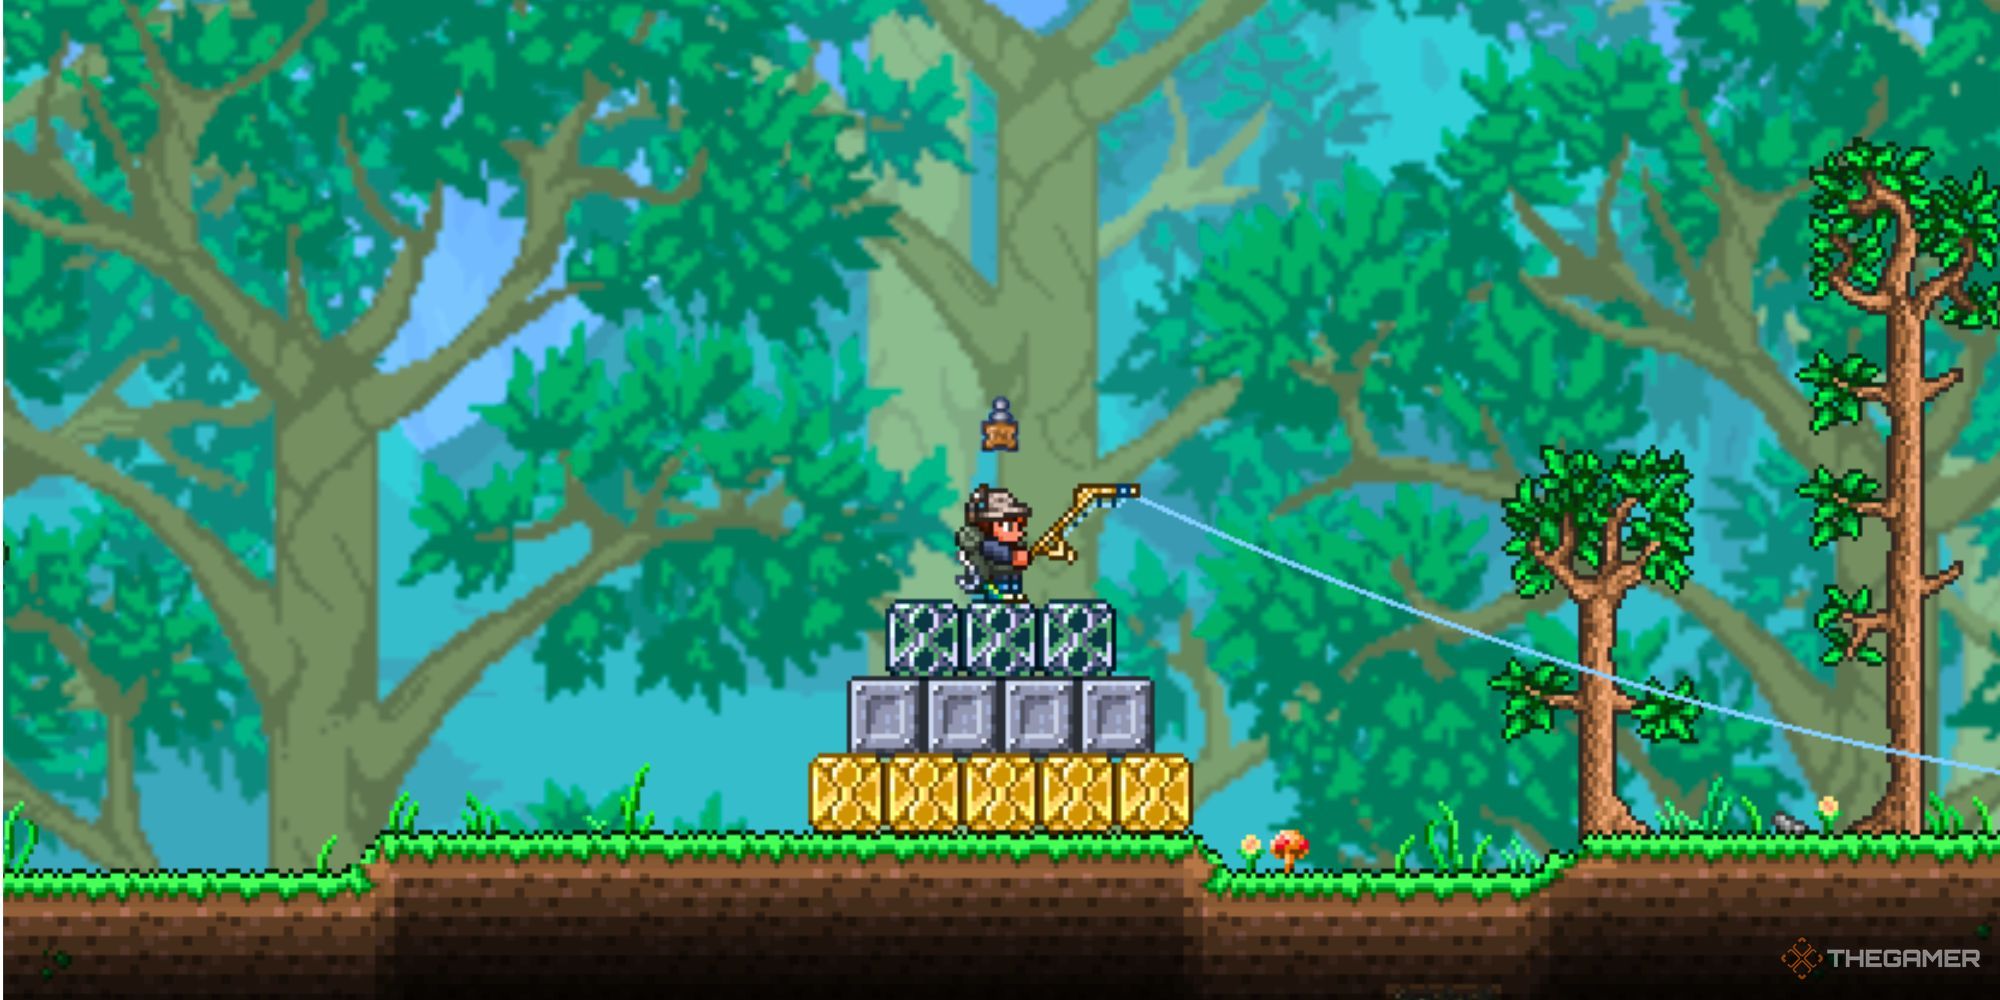 A player casting a golden fishing rod from atop various, stacked iron, gold, and titanium fishing crates.